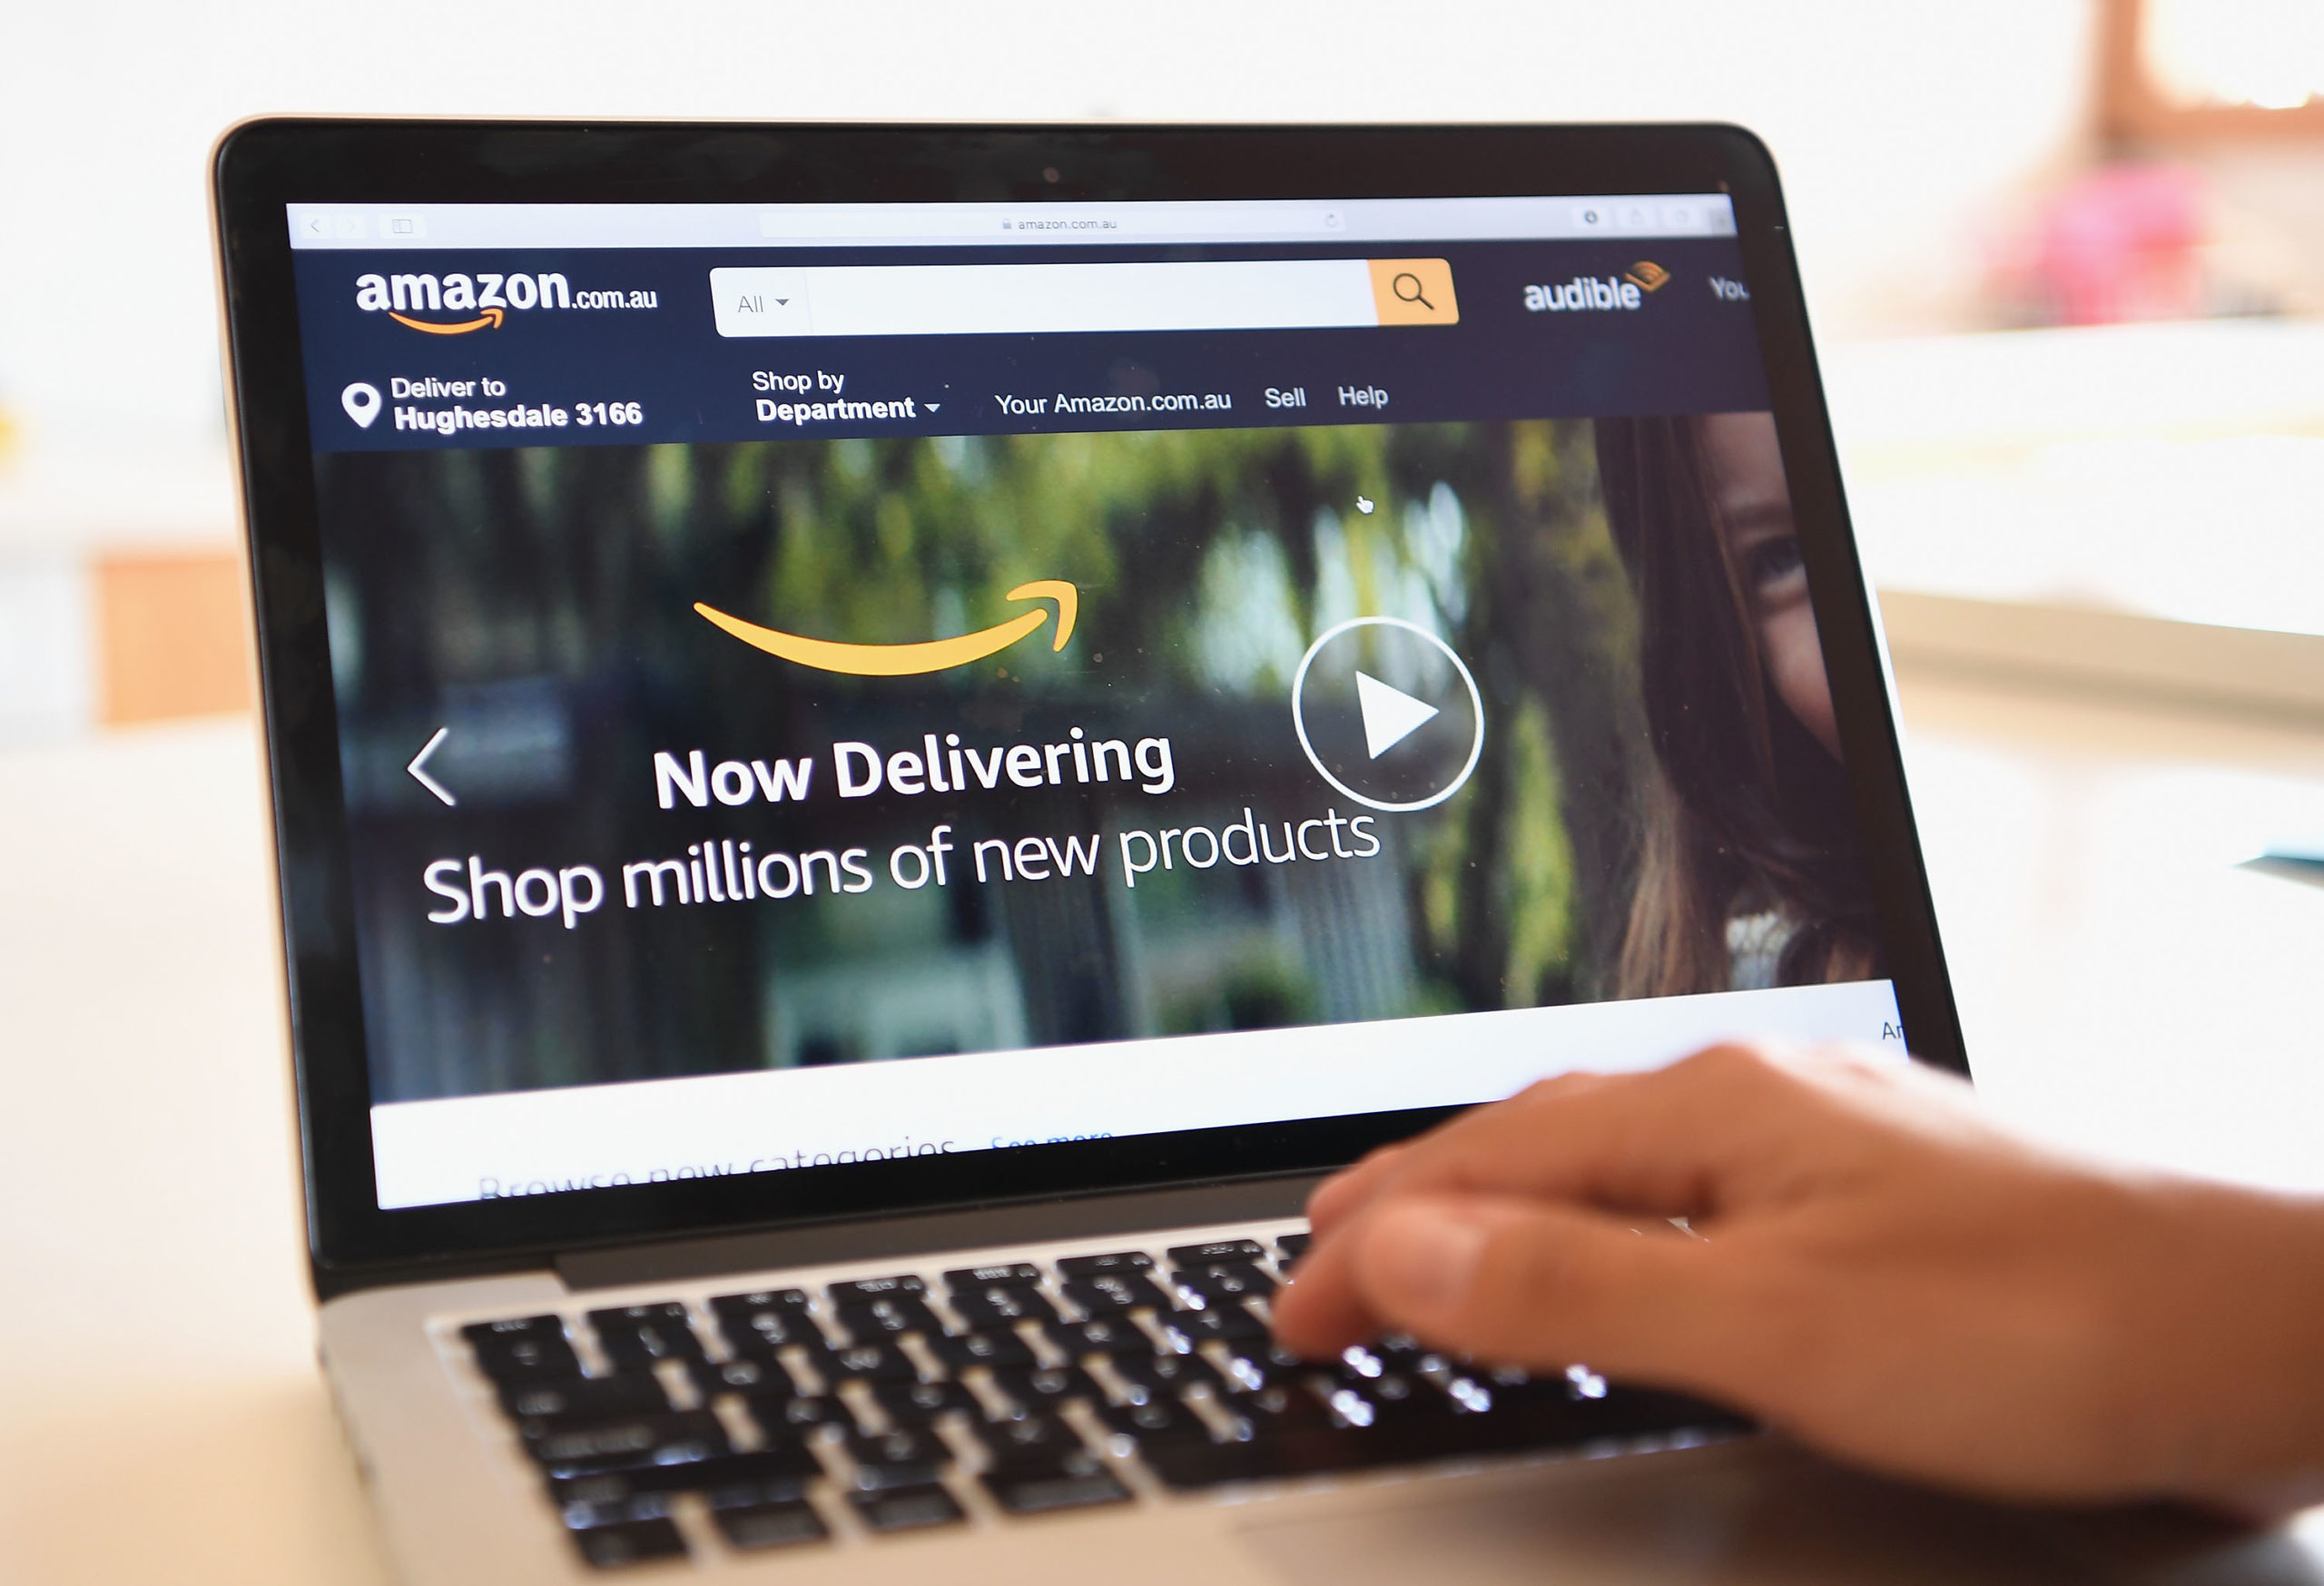 DANDENONG, AUSTRALIA - DECEMBER 05: The Amazon website is seen on December 5, 2017 in Dandenong, Australia. Amazon has ended months of speculation by launching its local website overnight. The online retail giant has started taking orders and shipping products from its 'fulfilment centre' in Dandenong South, offering massive discounts on millions of items across more than 20 categories including electronics, toys, clothing, beauty and accessories. (Photo by Quinn Rooney/Getty Images)